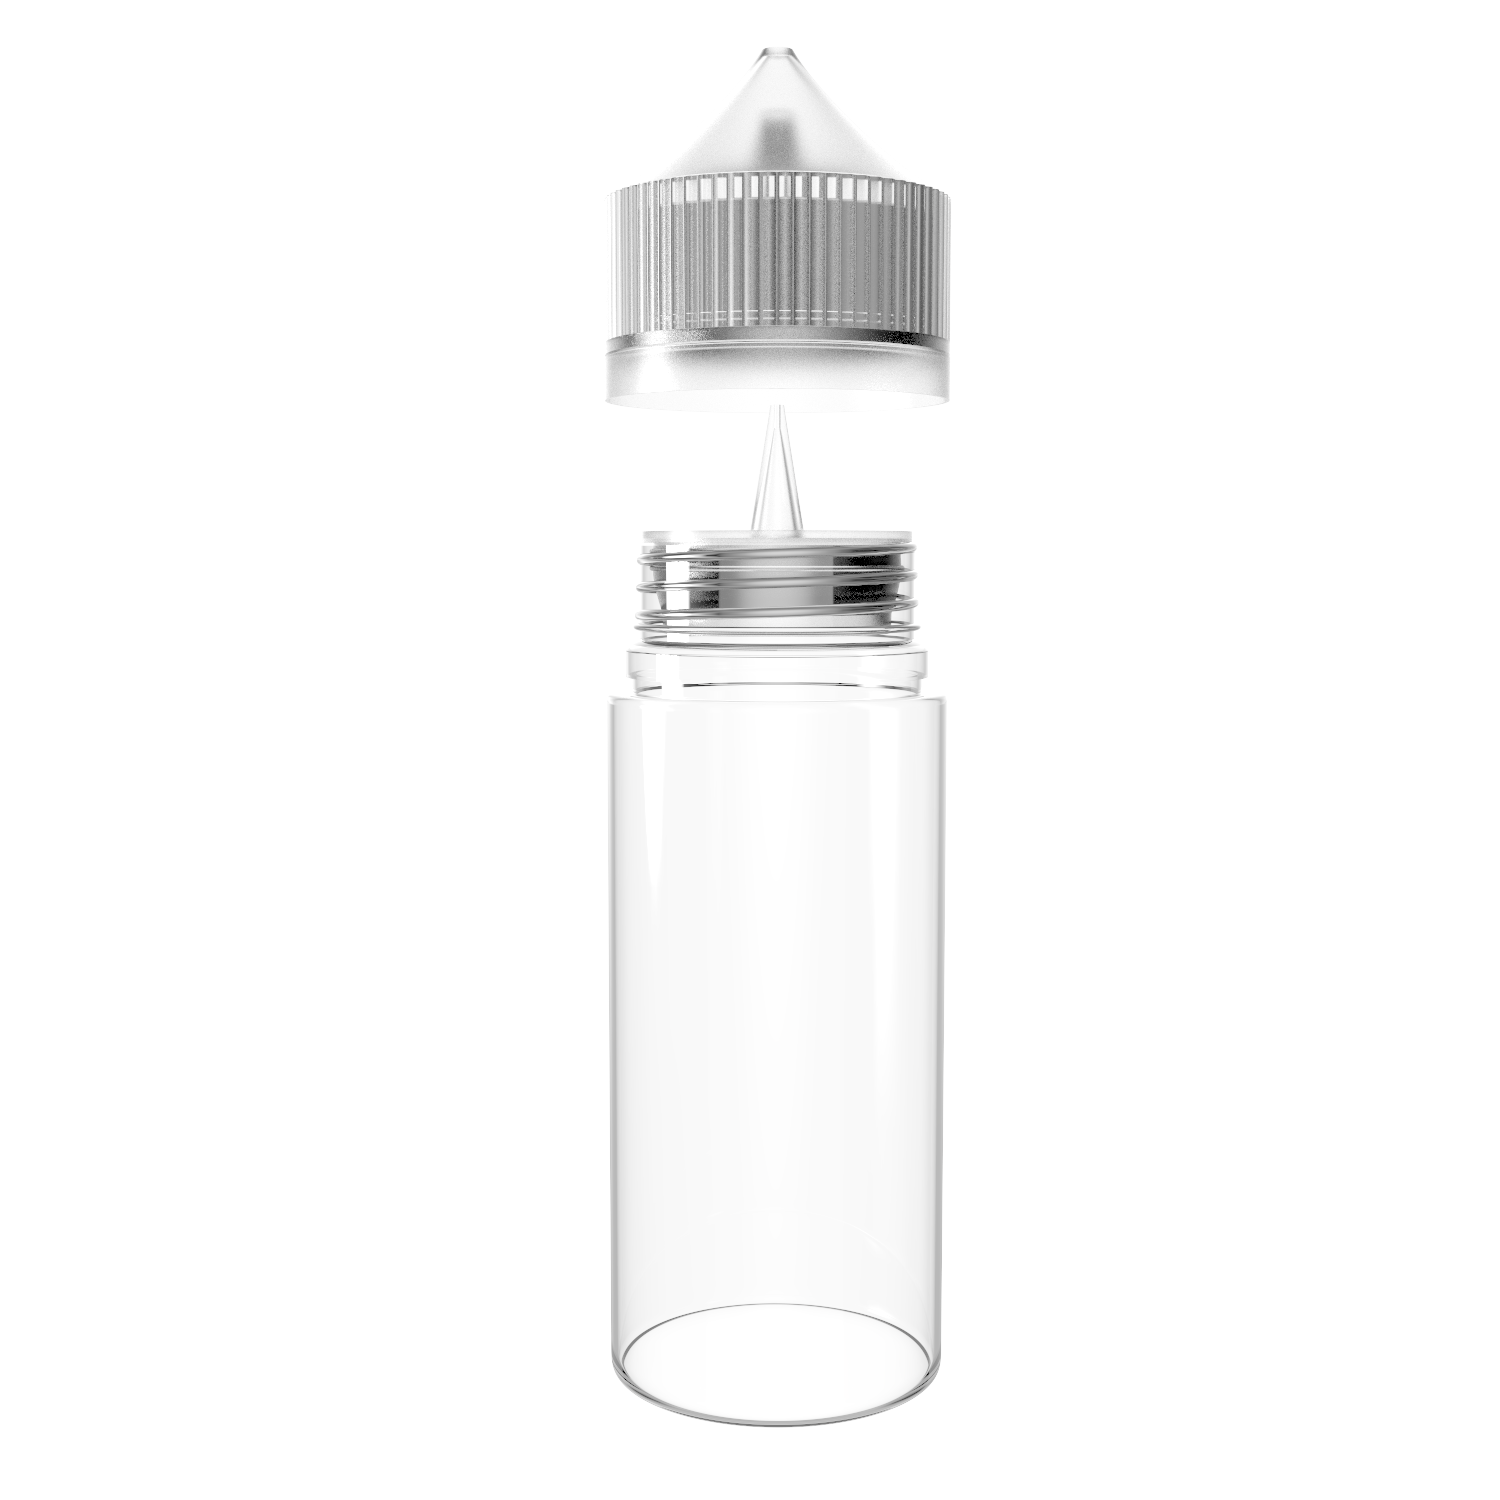  ml unicorn natural. Clear bottle png